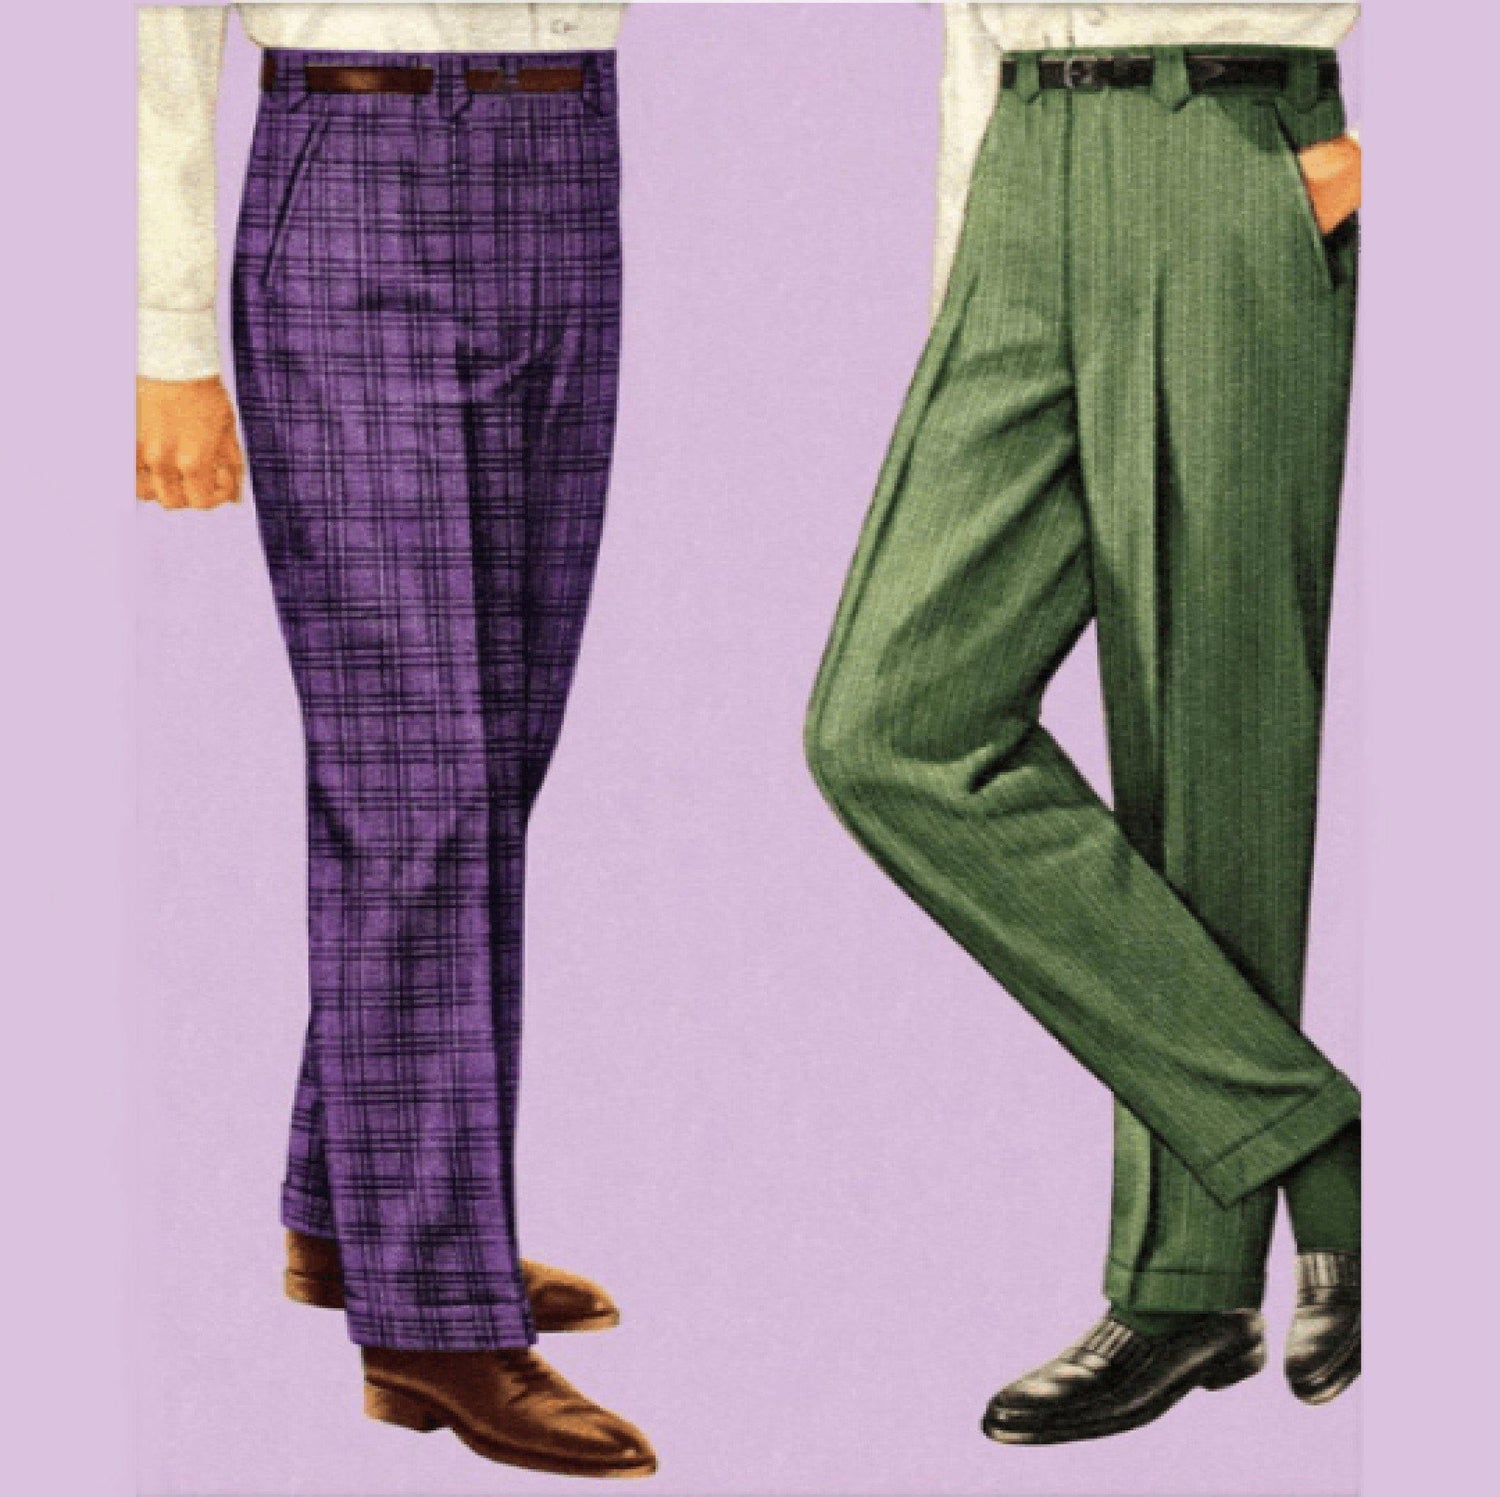 PDF - 1950s Pattern, Men's Trousers and Bermuda Shorts - Multi sizes - Instantly Print at Home - Vintage Sewing Pattern Company